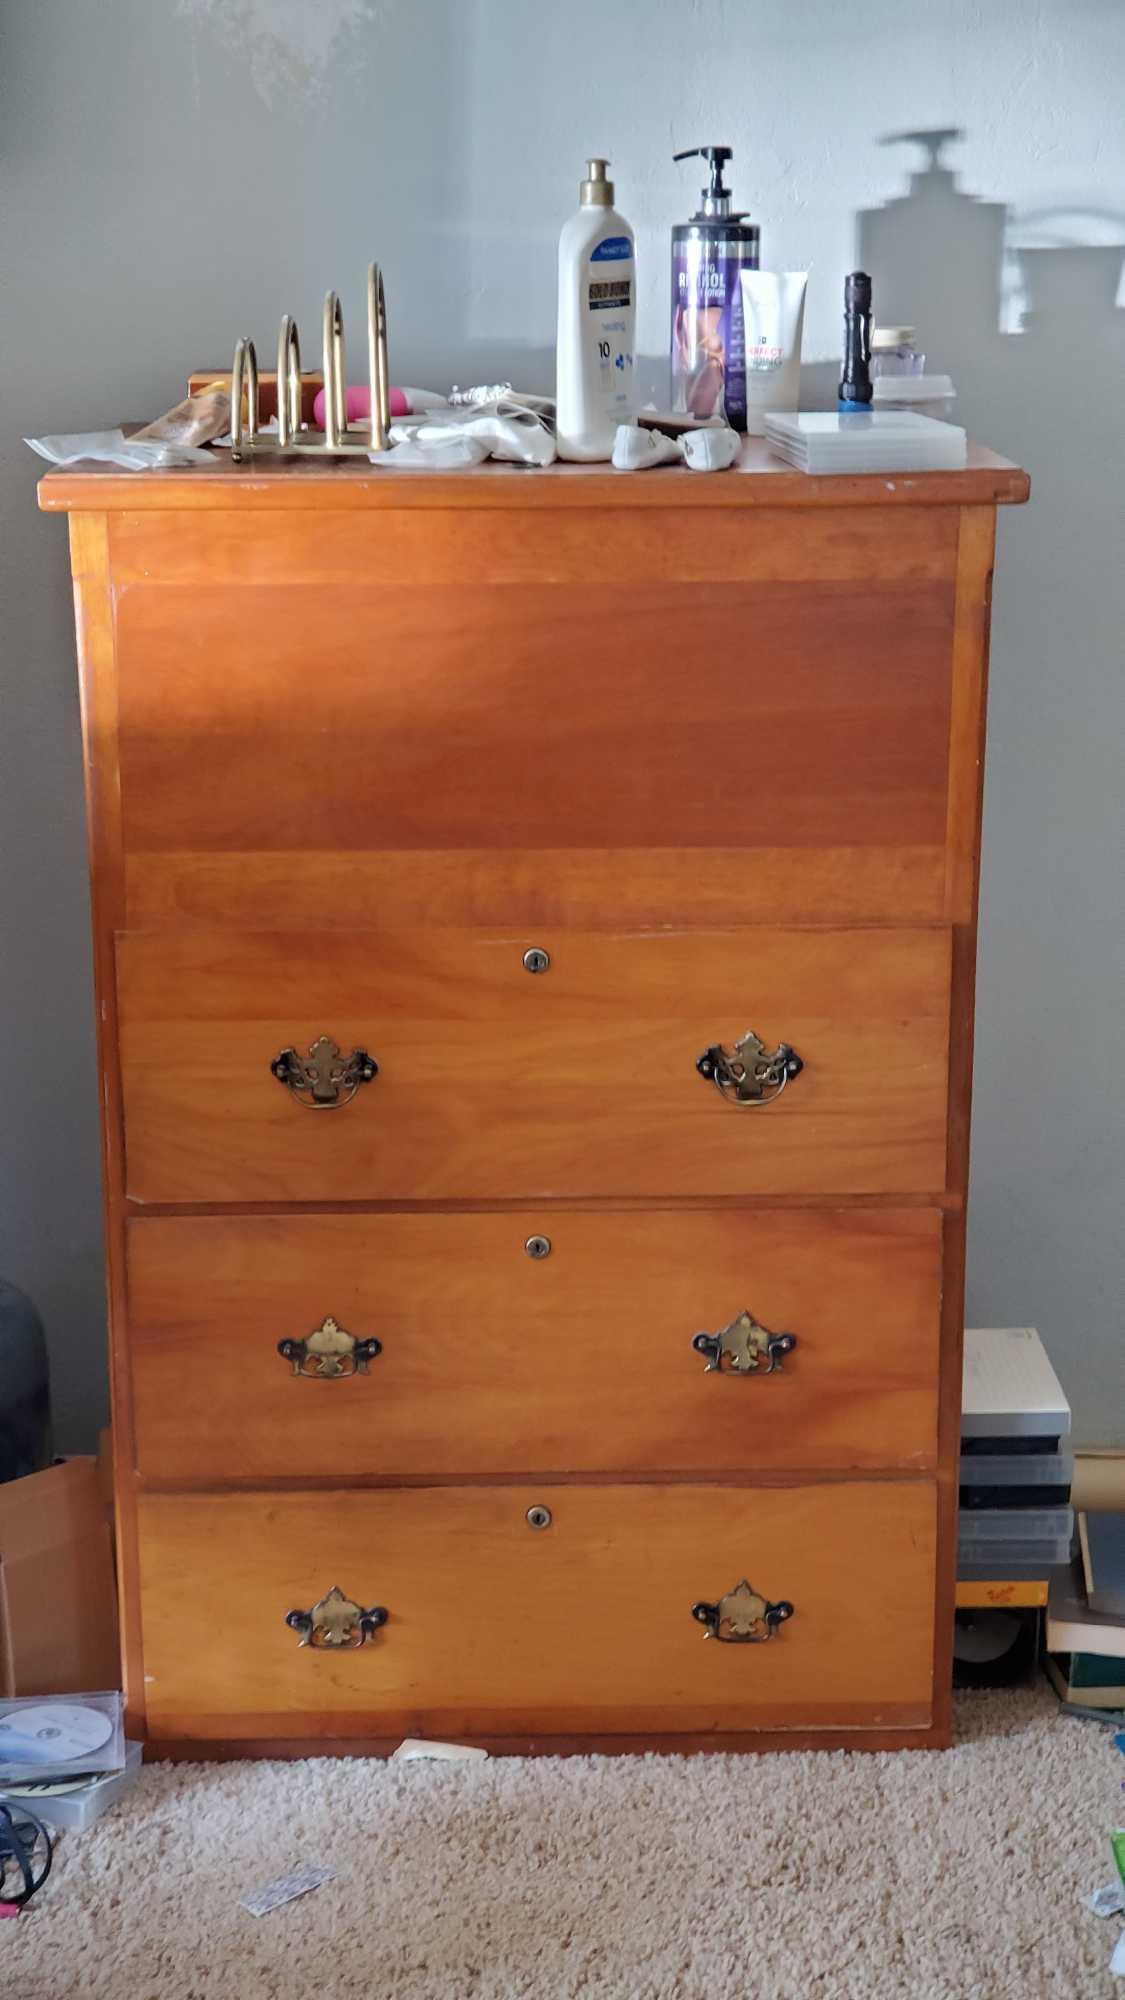 Large wooden dresser with clothing/contents @ farm